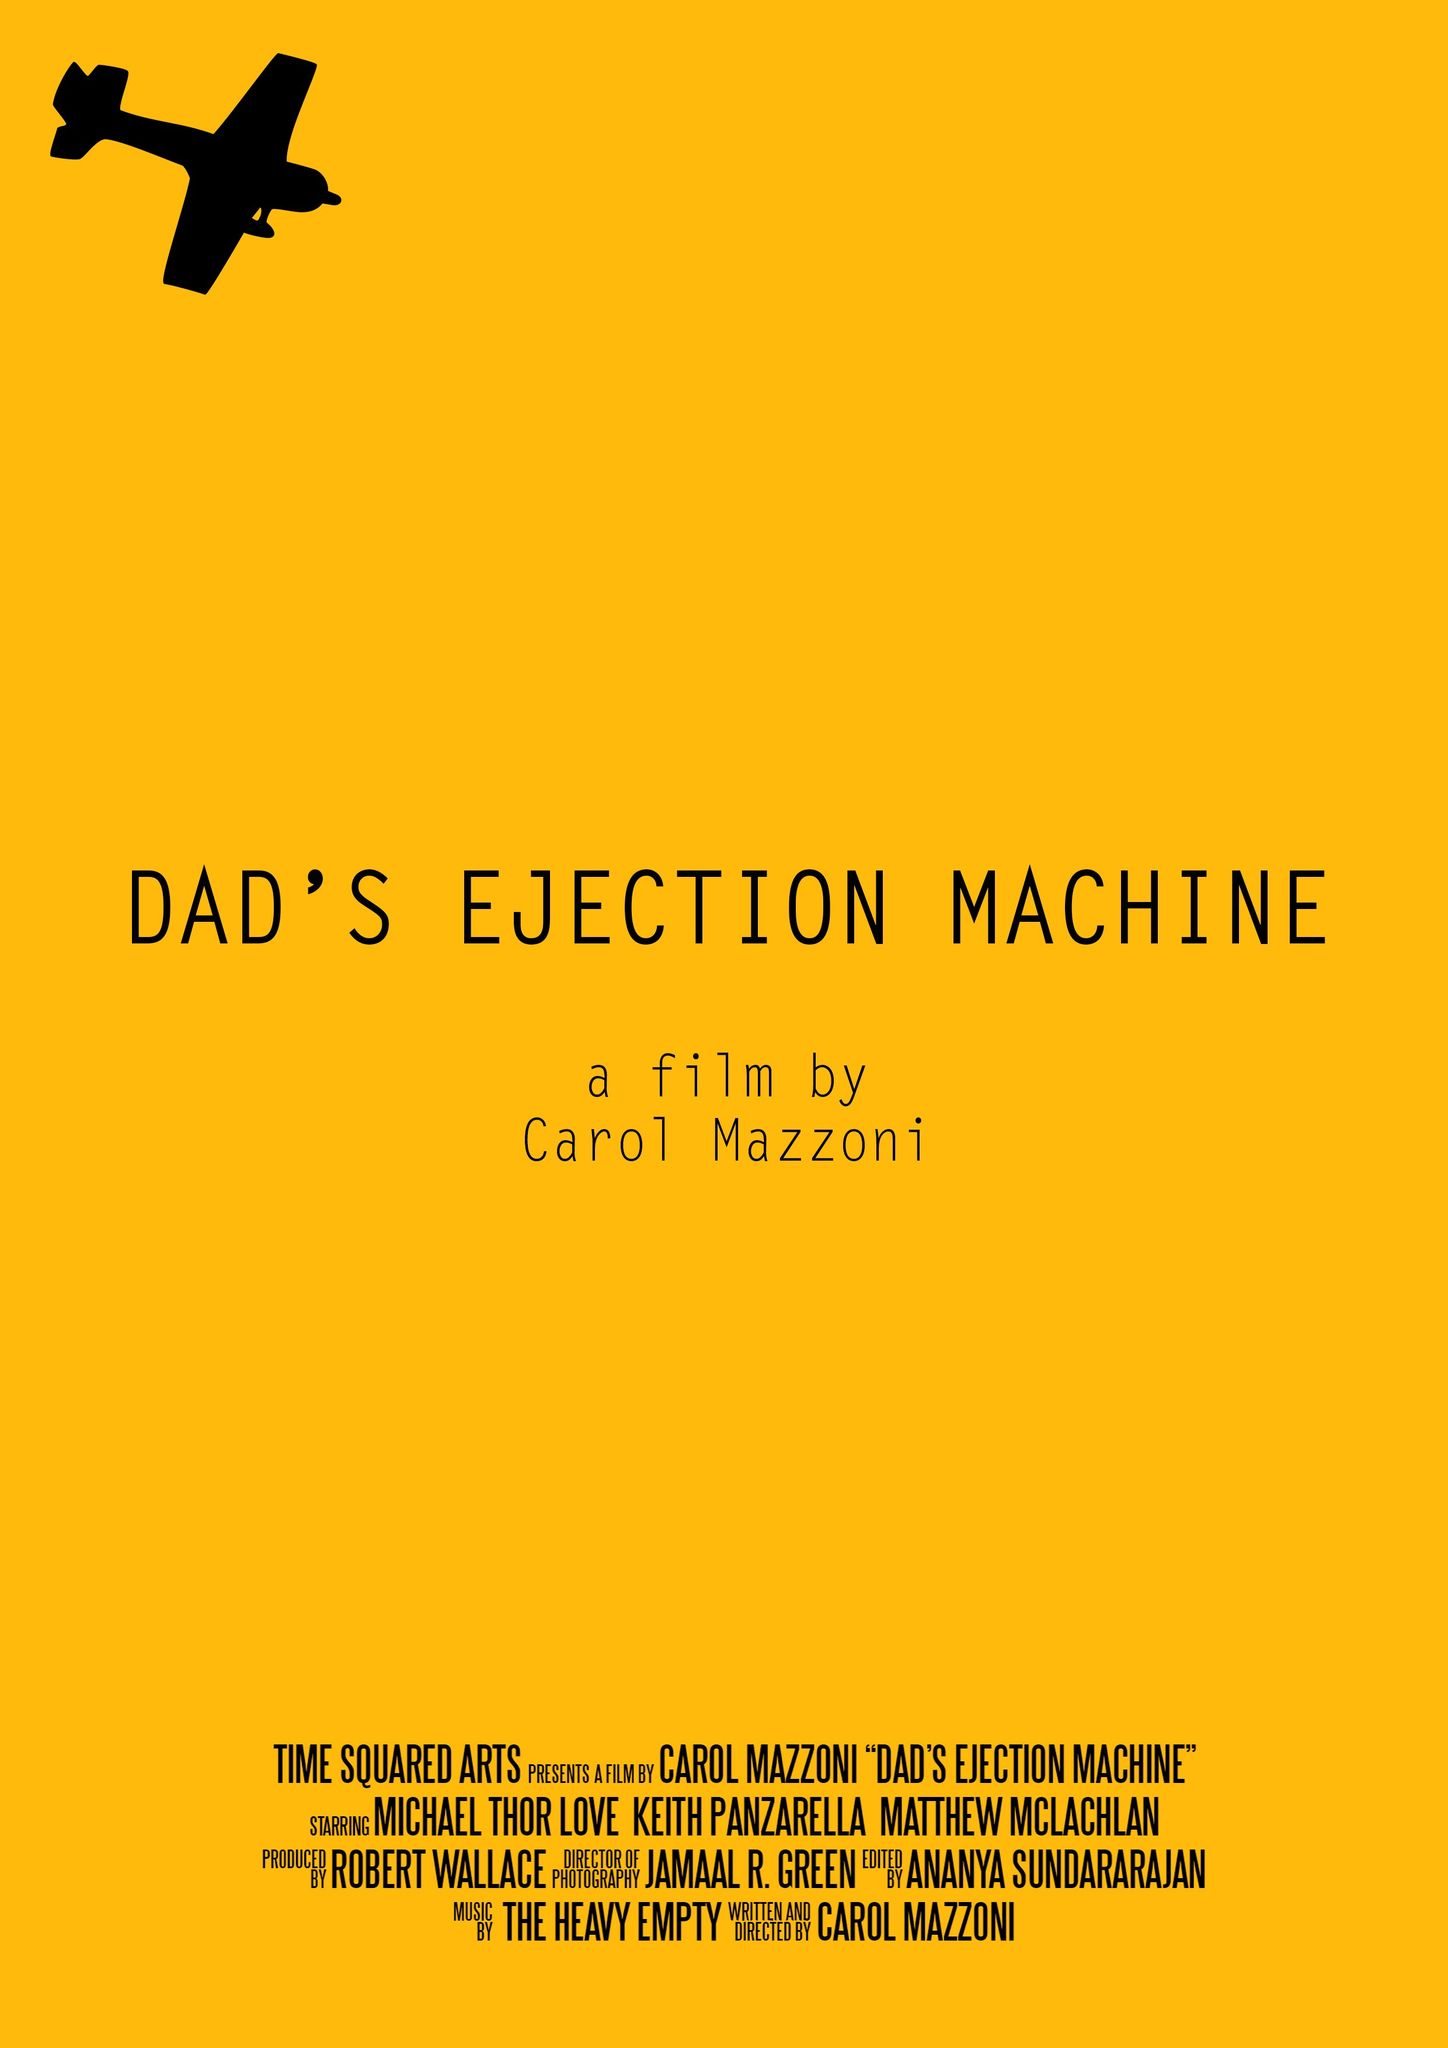 Dad's Ejection Machine